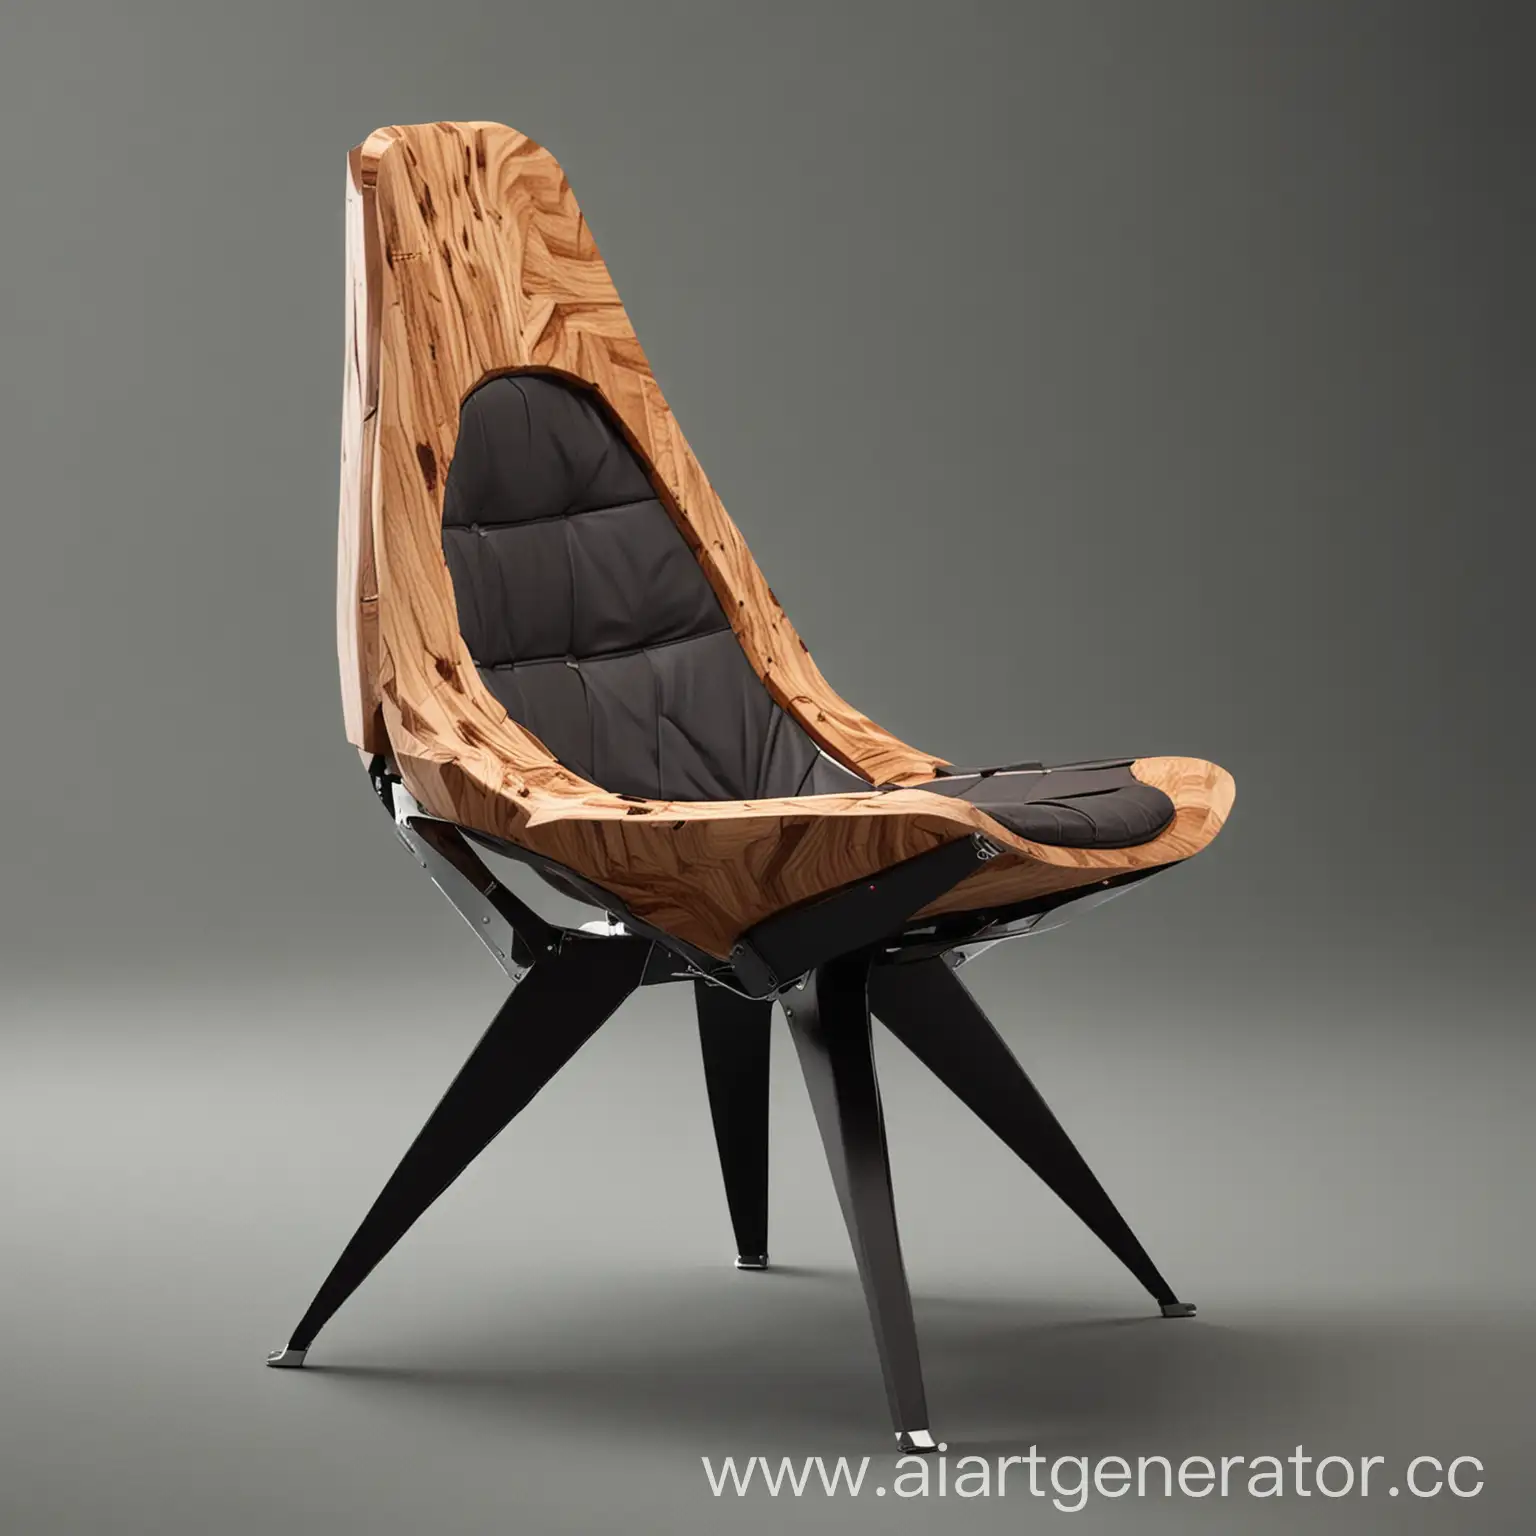 Futuristic-Chair-Design-with-Wood-Aluminum-and-Leather-Accents